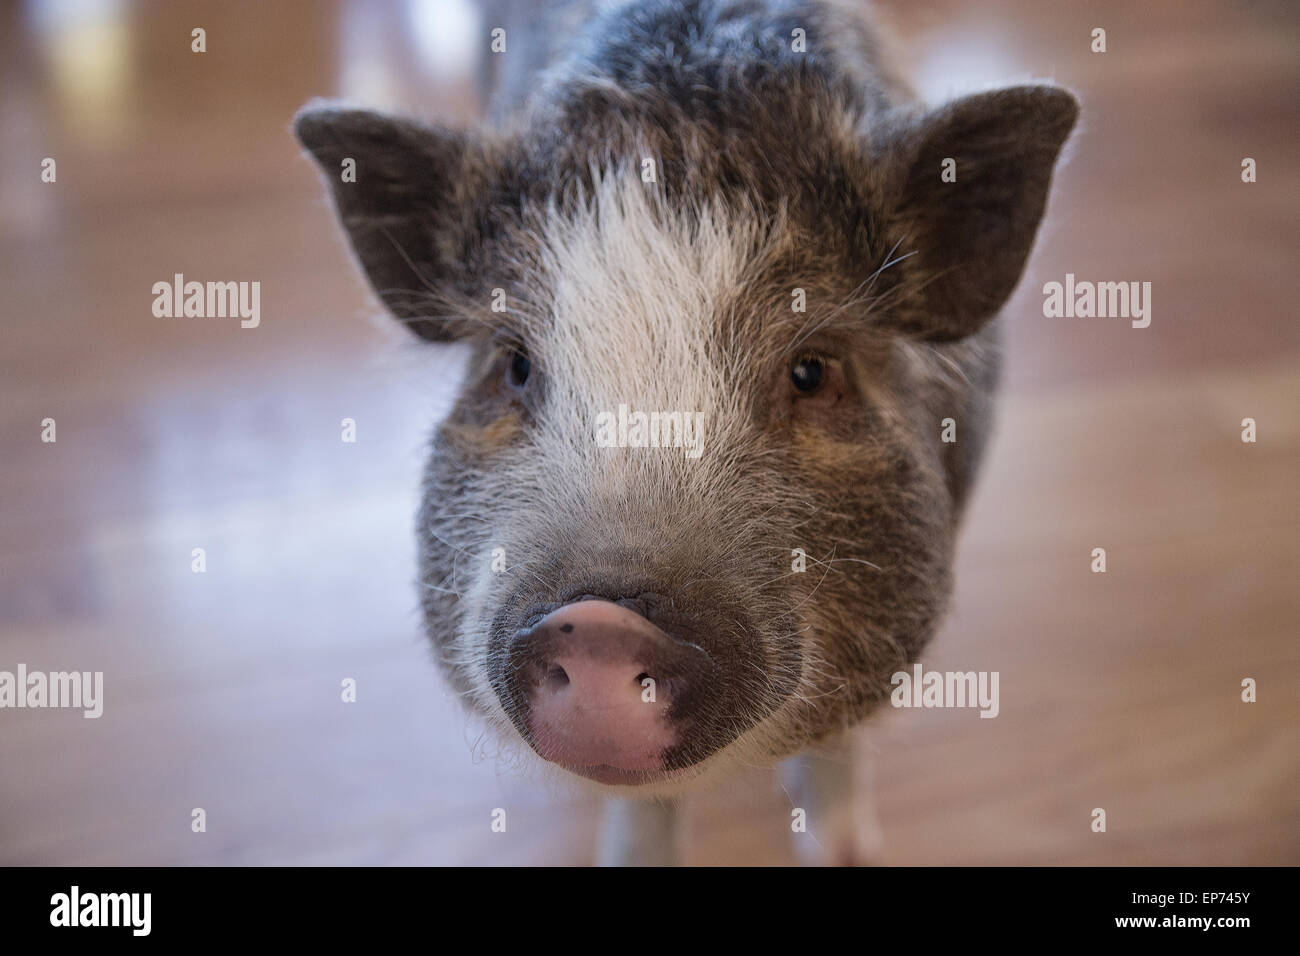 House pig face close up Stock Photo